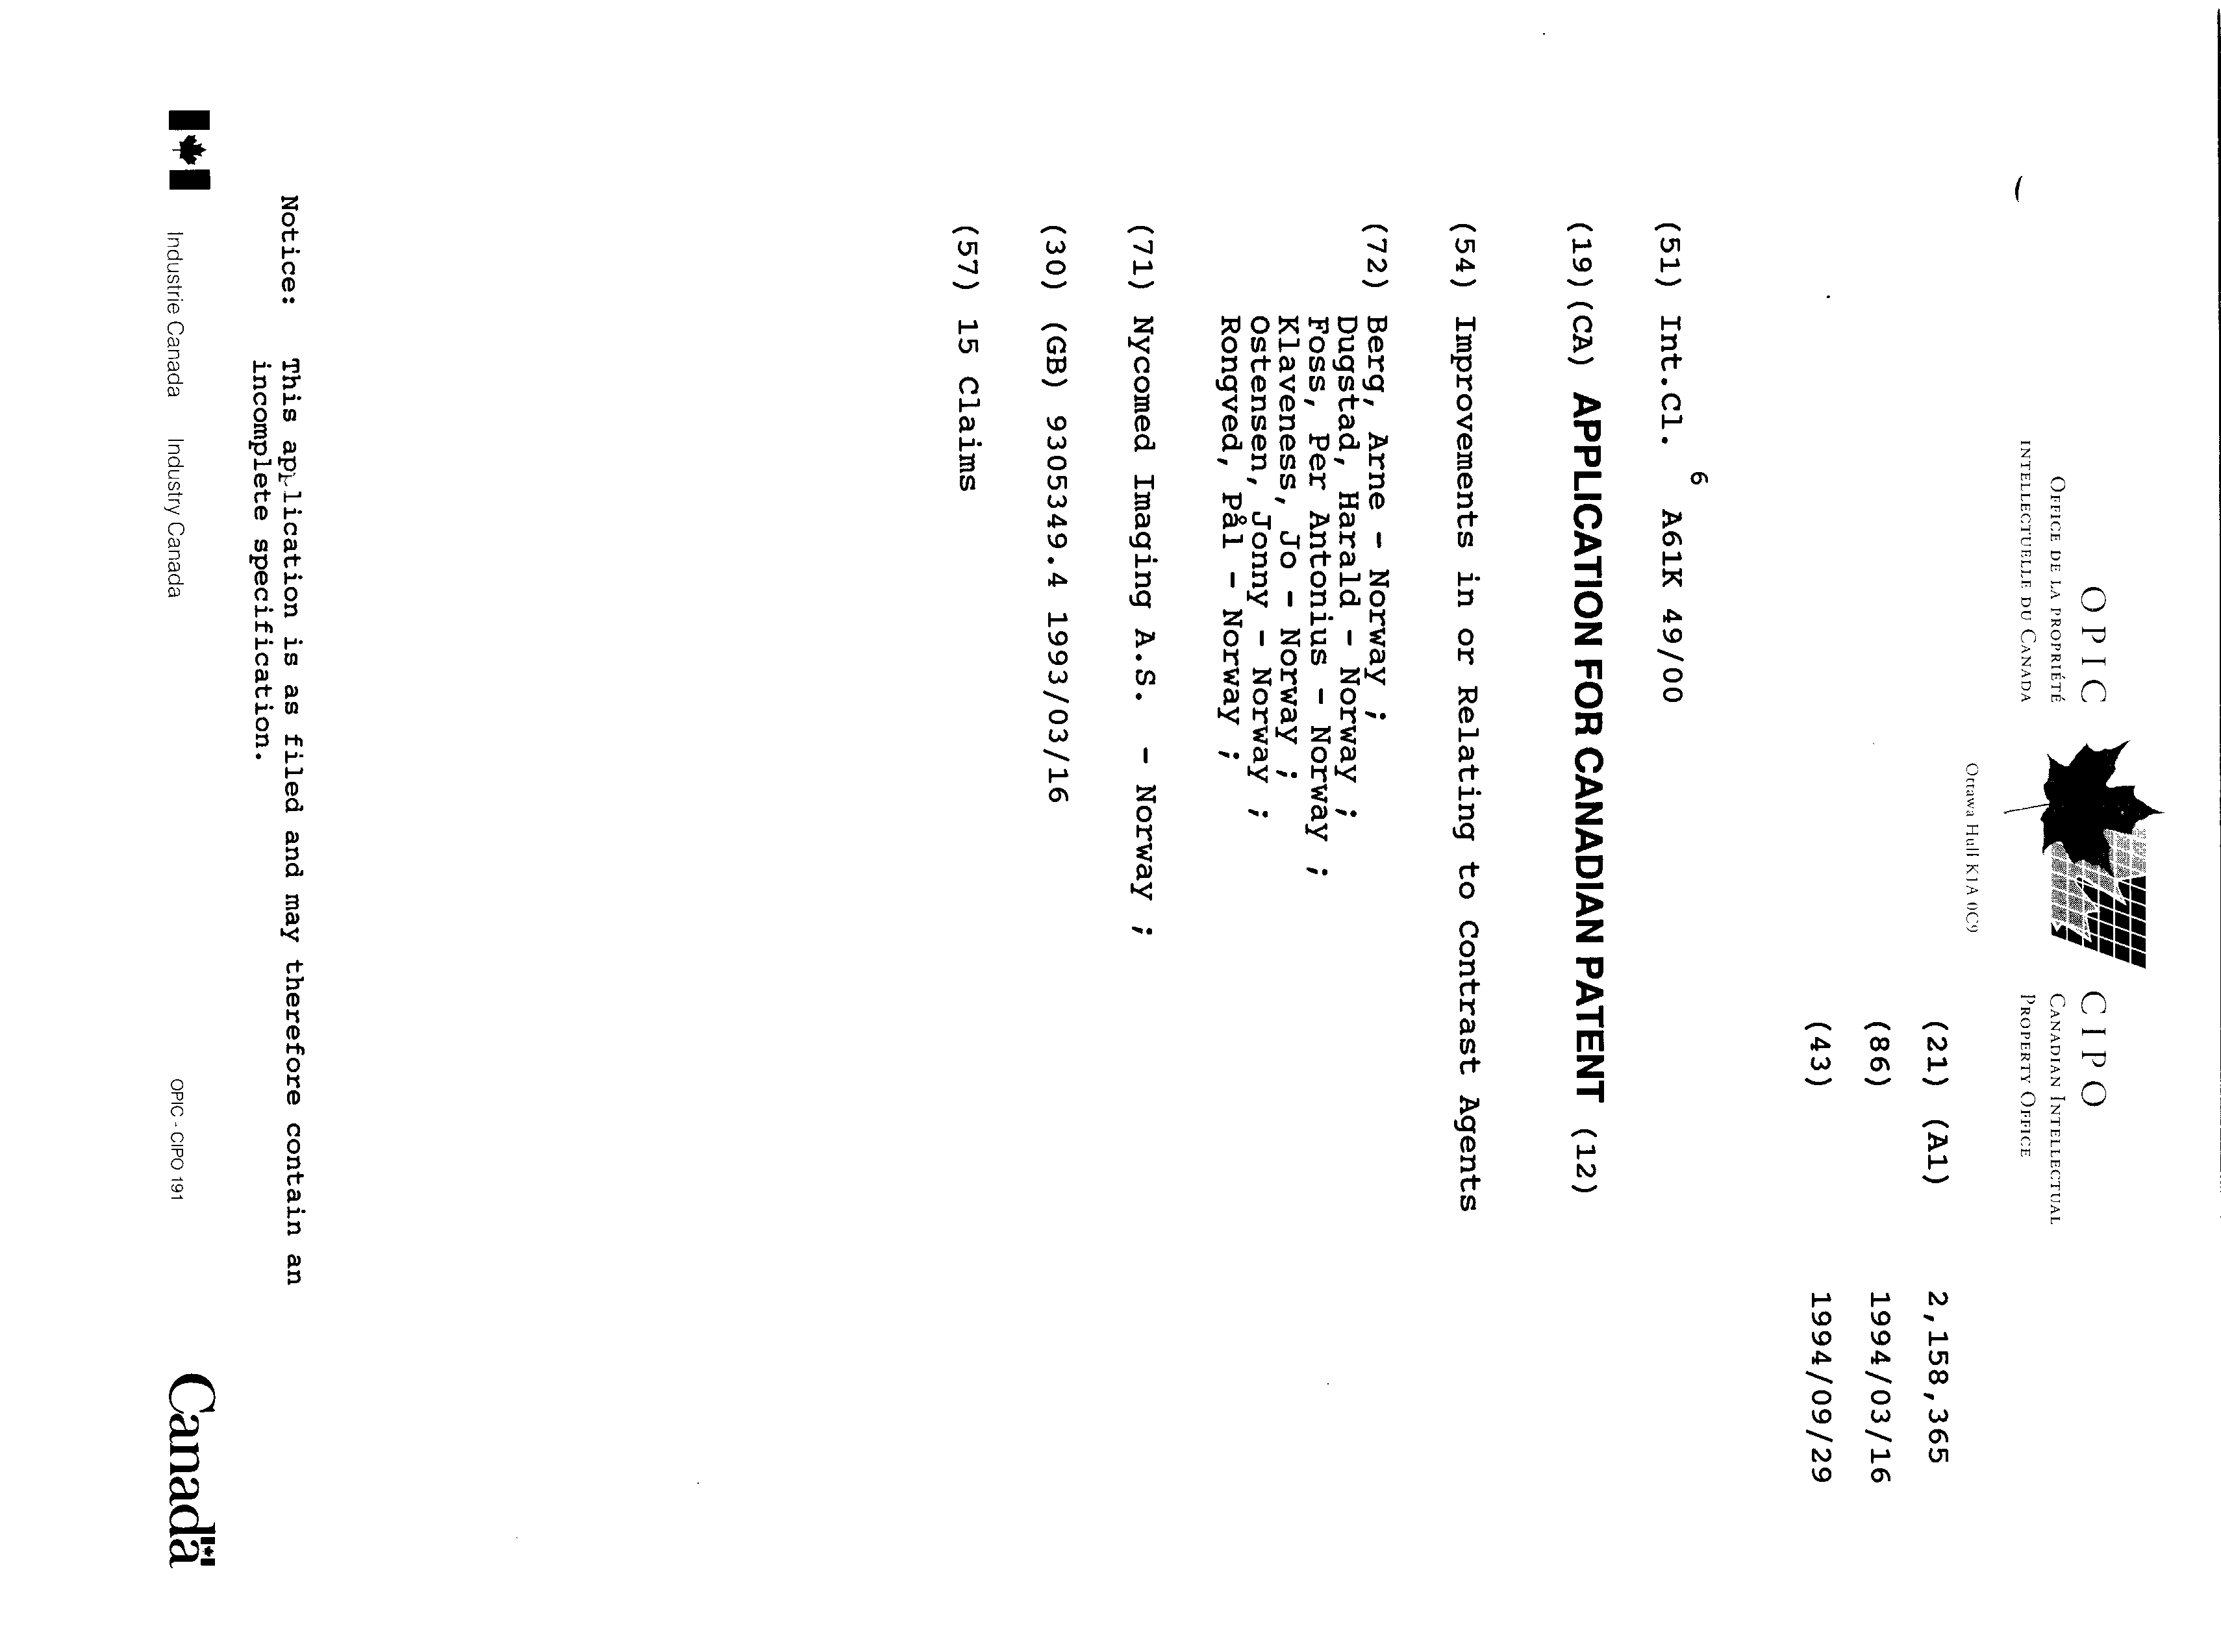 Canadian Patent Document 2158365. Cover Page 19951220. Image 1 of 1